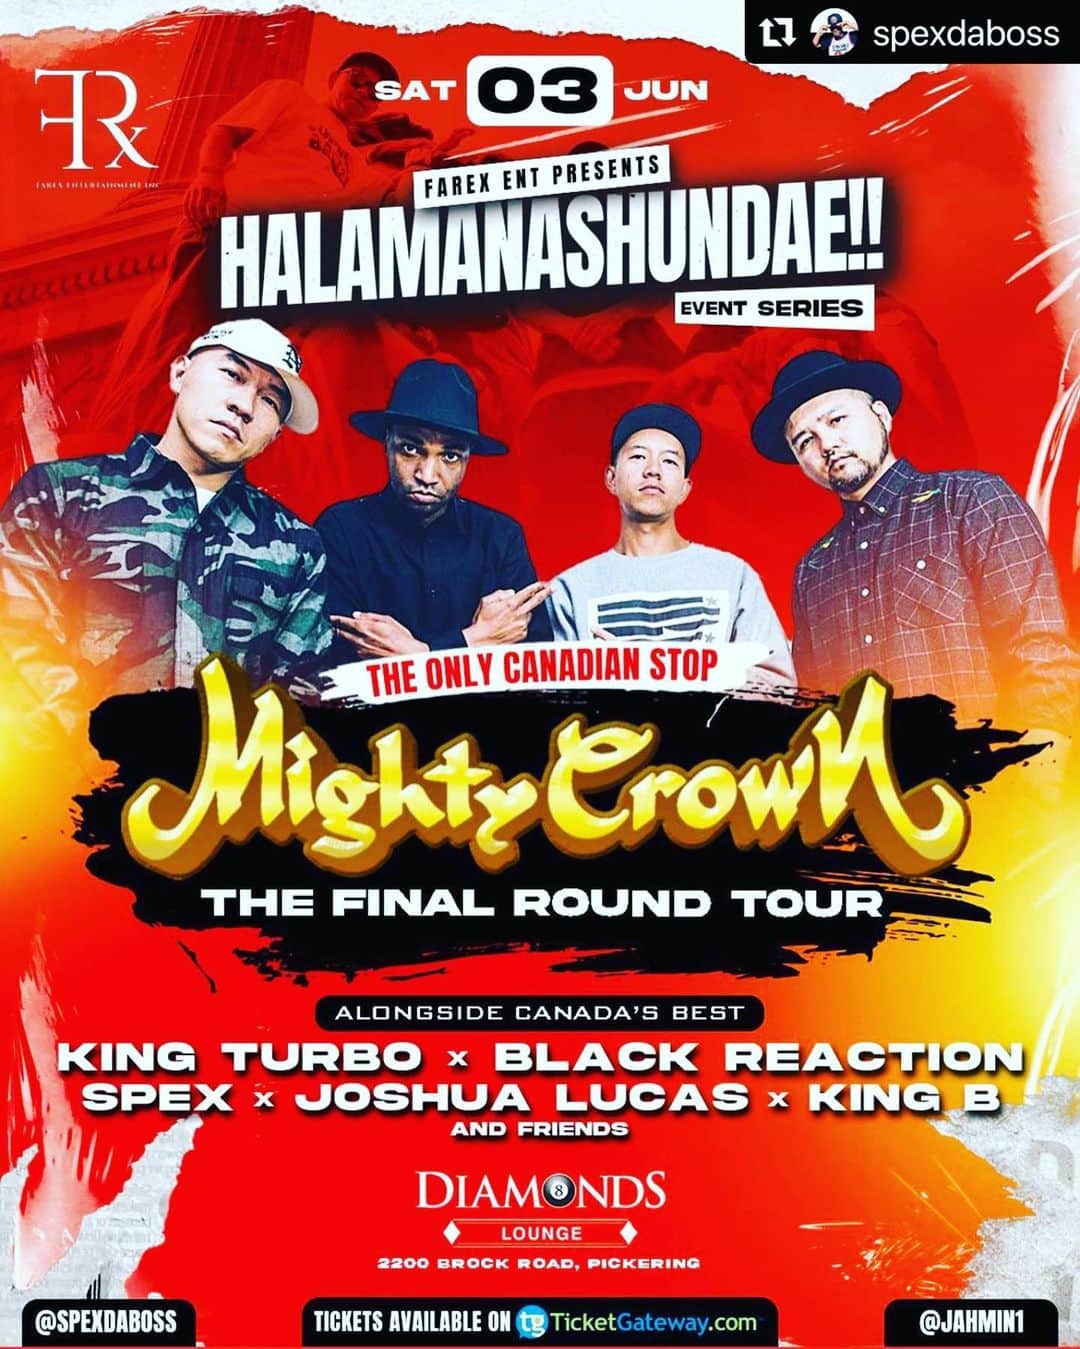 mastasimonのインスタグラム：「🇨🇦 Canada 🇨🇦 カナダ 🇨🇦 Toronto  Lock your date June 3rd !  Mighty Crown Final Round Tour !  It’s gonna be Krazy !!   #Repost @spexdaboss   Farex Entertainment Presents HALAMANASHUNDAE!!!  The Final Round Tour: Featuring all the way from Japan for their final performance in the North - The Far East Rulaz!!!  Saturday June 3  @MIGHTYCROWN will make their final appearance in Canada before they call it a career.   Be a part of history as we celebrate one of the most influential sound systems ever, and their contribution to the Dancehall Reggae Culture.  Also Featuring Canadas Finest: @kingturbosound  @blackreactionsound  @spexdaboss  @joshuaxlucas  @kingbchosen1  and special guests…  All taking place at the east ends premier location @diamondsbilliardsandlounge   For Information, booths, ticket pick up and delivery contact @jahmin1 or call 416.820.3156  Limited Early bird tickets still available, secure yours now before they are gone!  Ticketgateway.com/mightycrown  🇯🇵🏆🇯🇲🏆🇨🇦   #mightycrown」